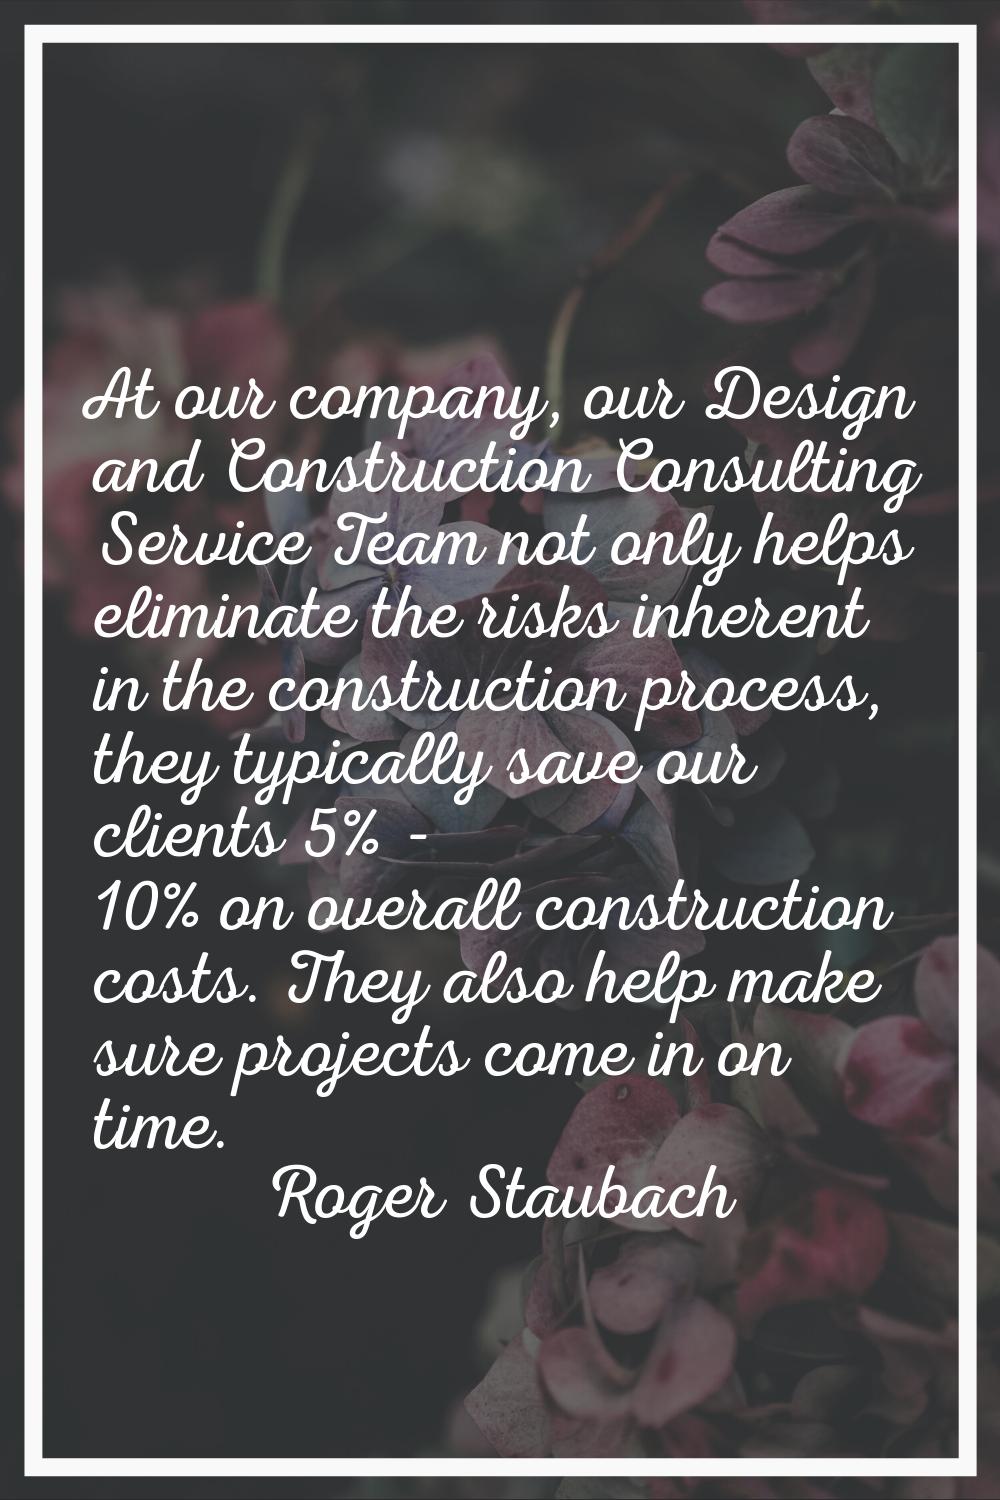 At our company, our Design and Construction Consulting Service Team not only helps eliminate the ri